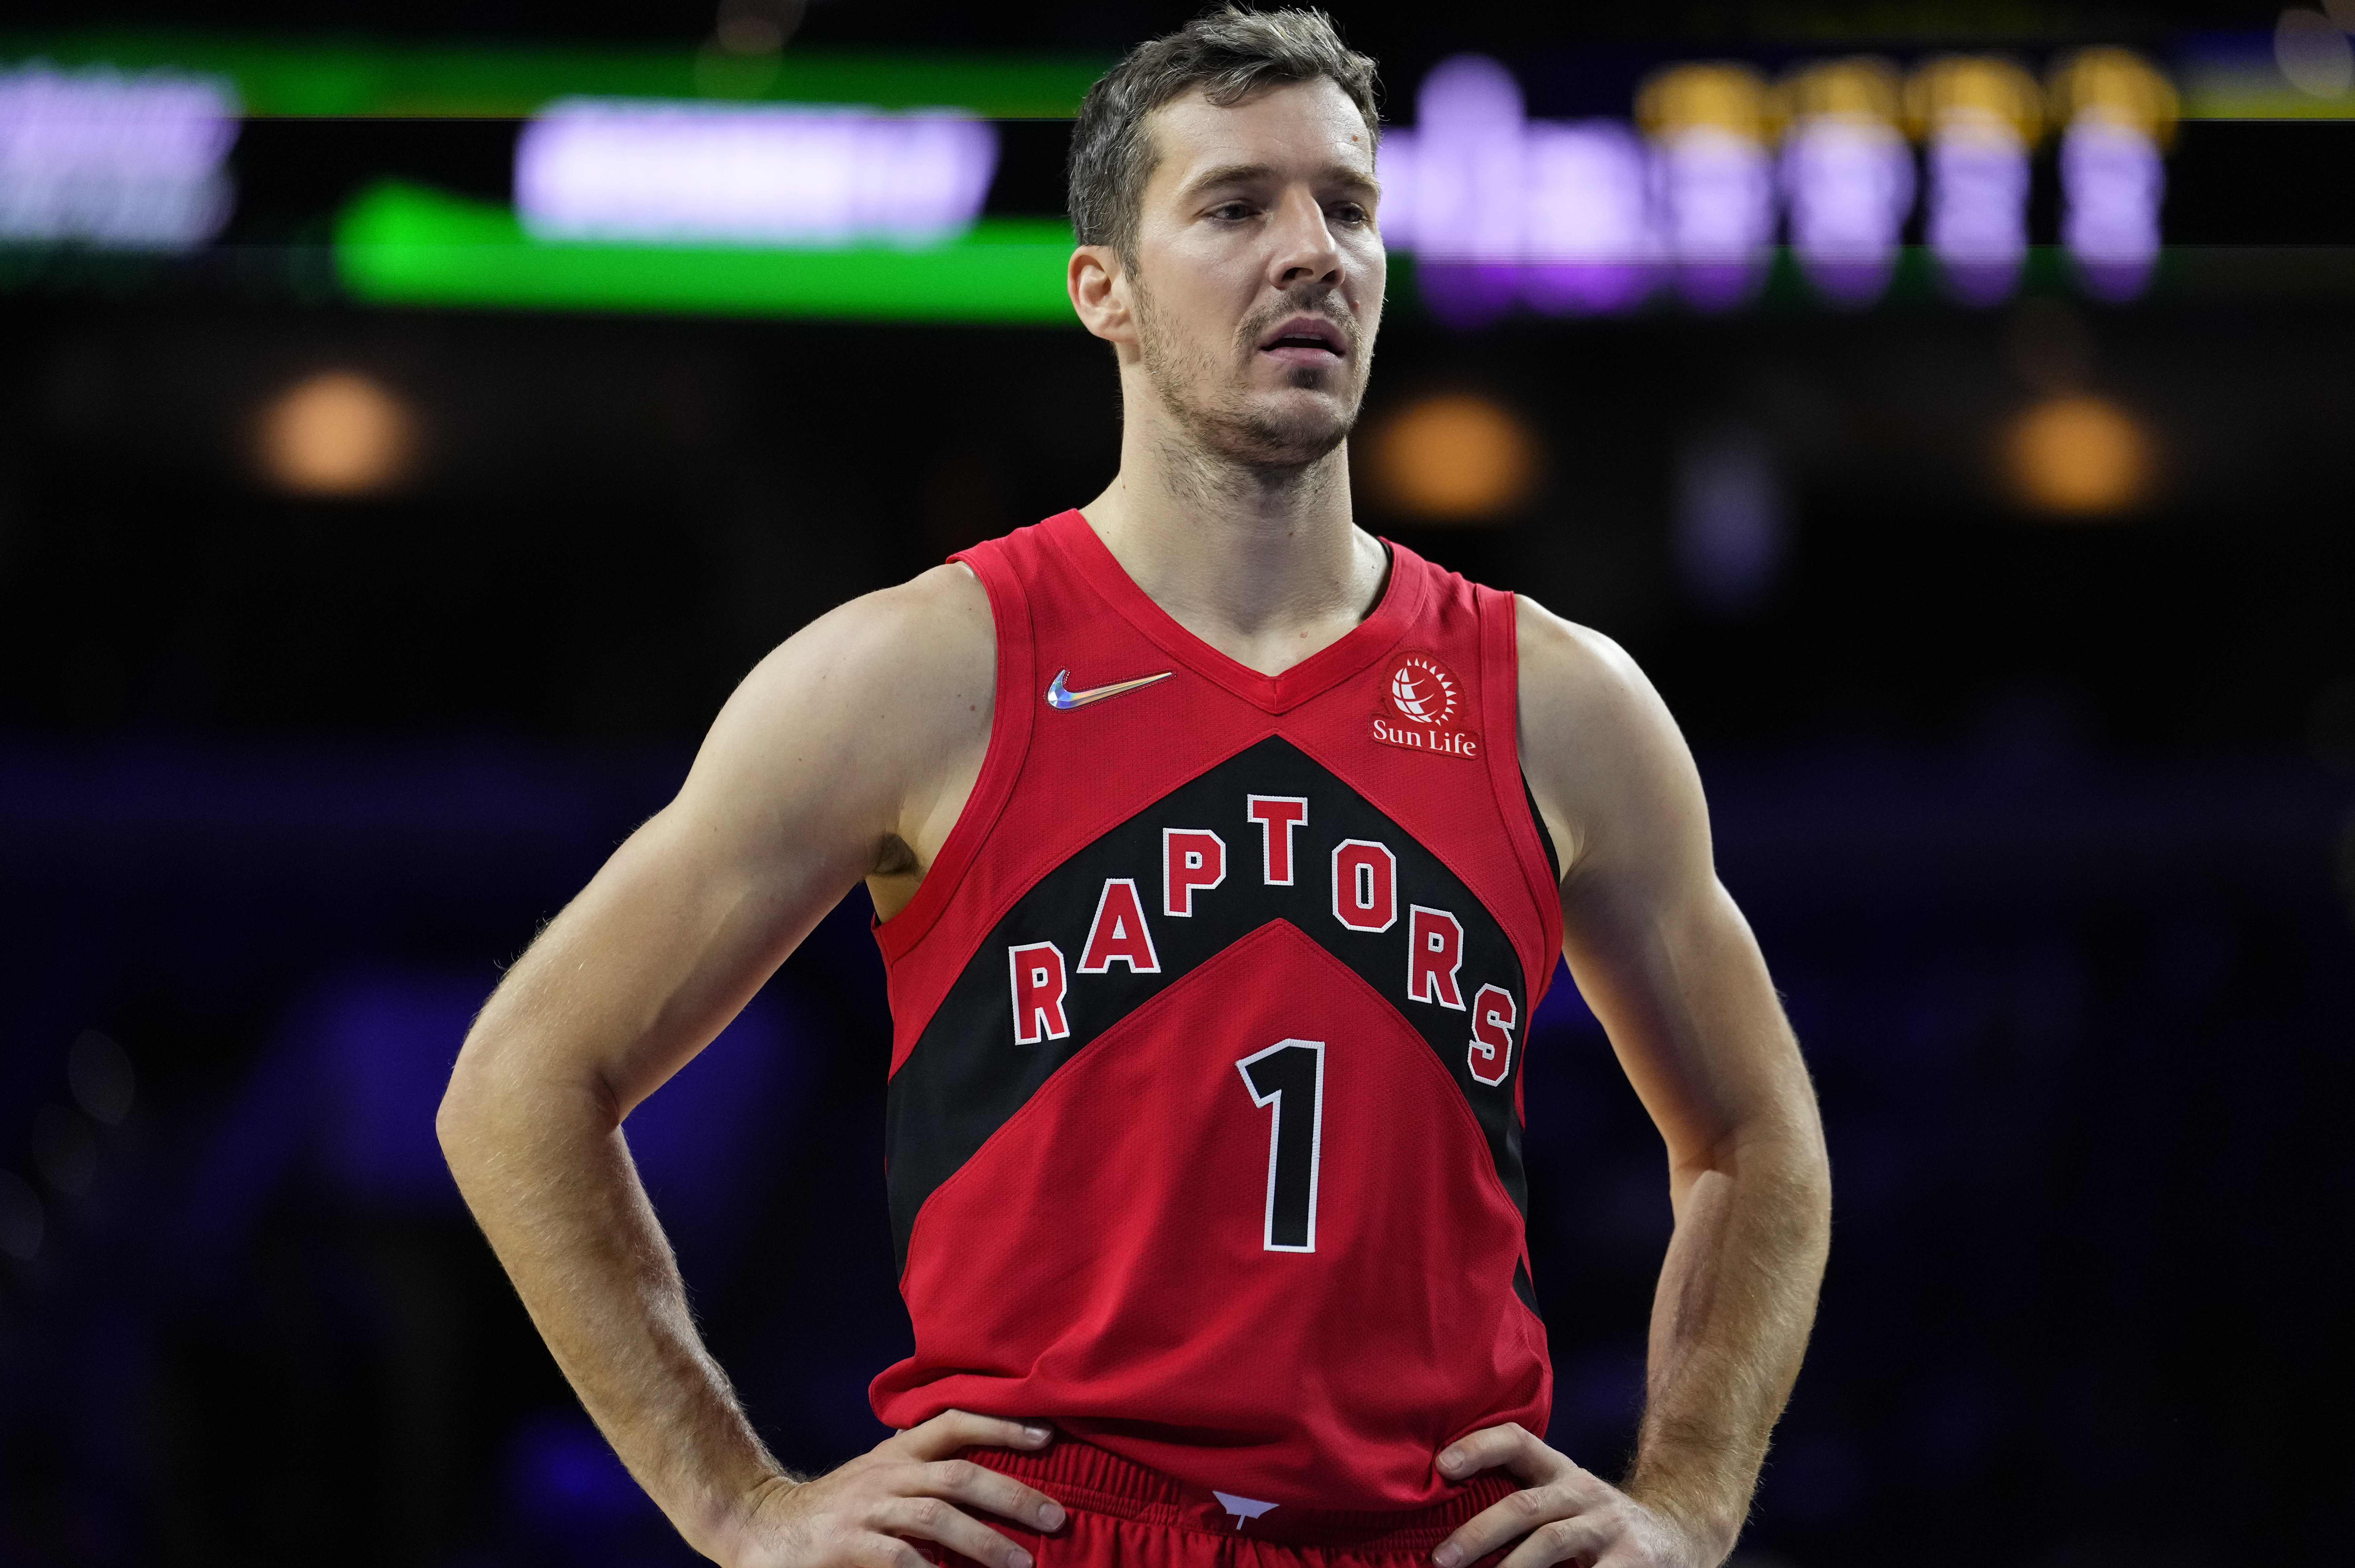 The Athletic on X: Free agent guard Goran Dragic is signing with the  Brooklyn Nets, sources tell @ShamsCharania. Dragic was bought out after  being traded from the Raptors to the Spurs at